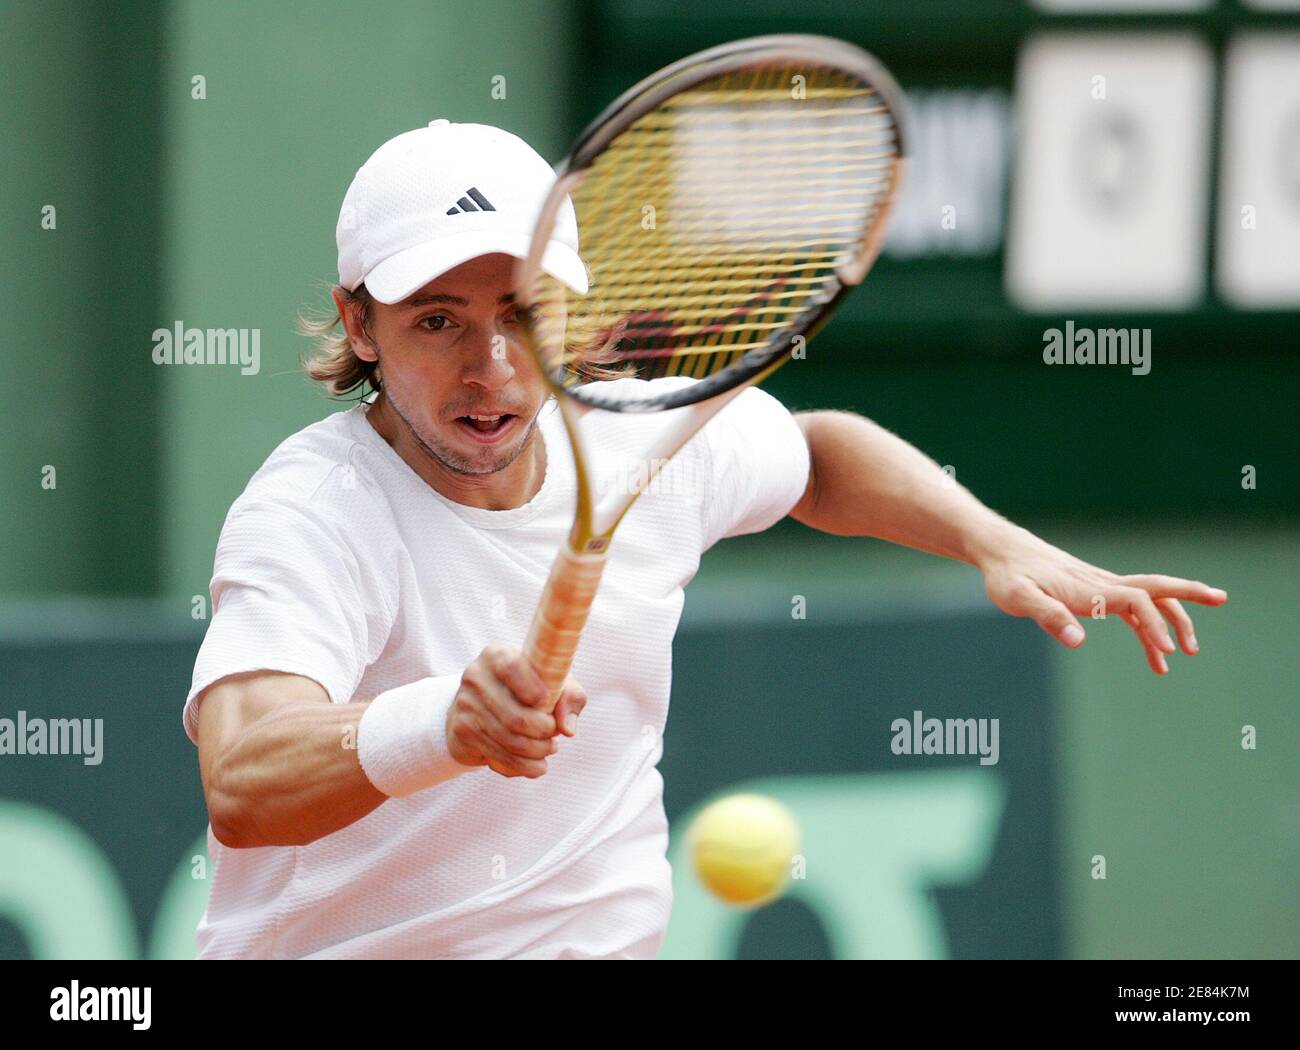 Francisco Rodriguez of Paraguay returns the ball to Alejandro Falla of  Colombia during their Davis cup tennis tournament match in Bogota,  Colombia, April 9, 2006. REUTERS/Daniel Munoz Stock Photo - Alamy